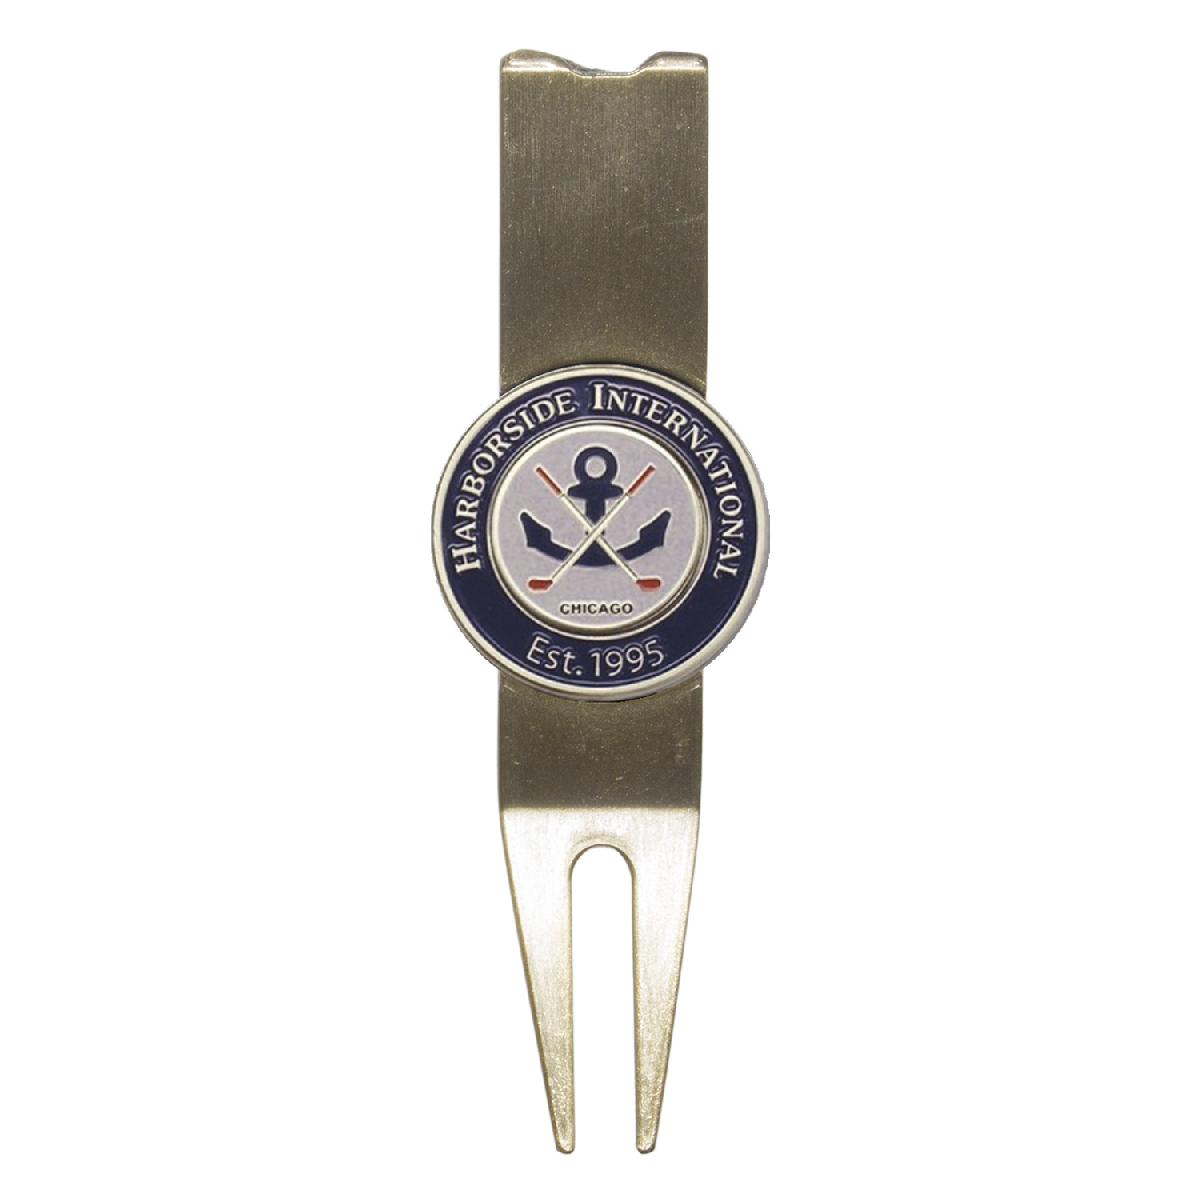 Modern Divot Repair Tool with Ball Marker and Club Rest. - Die Struck Logo